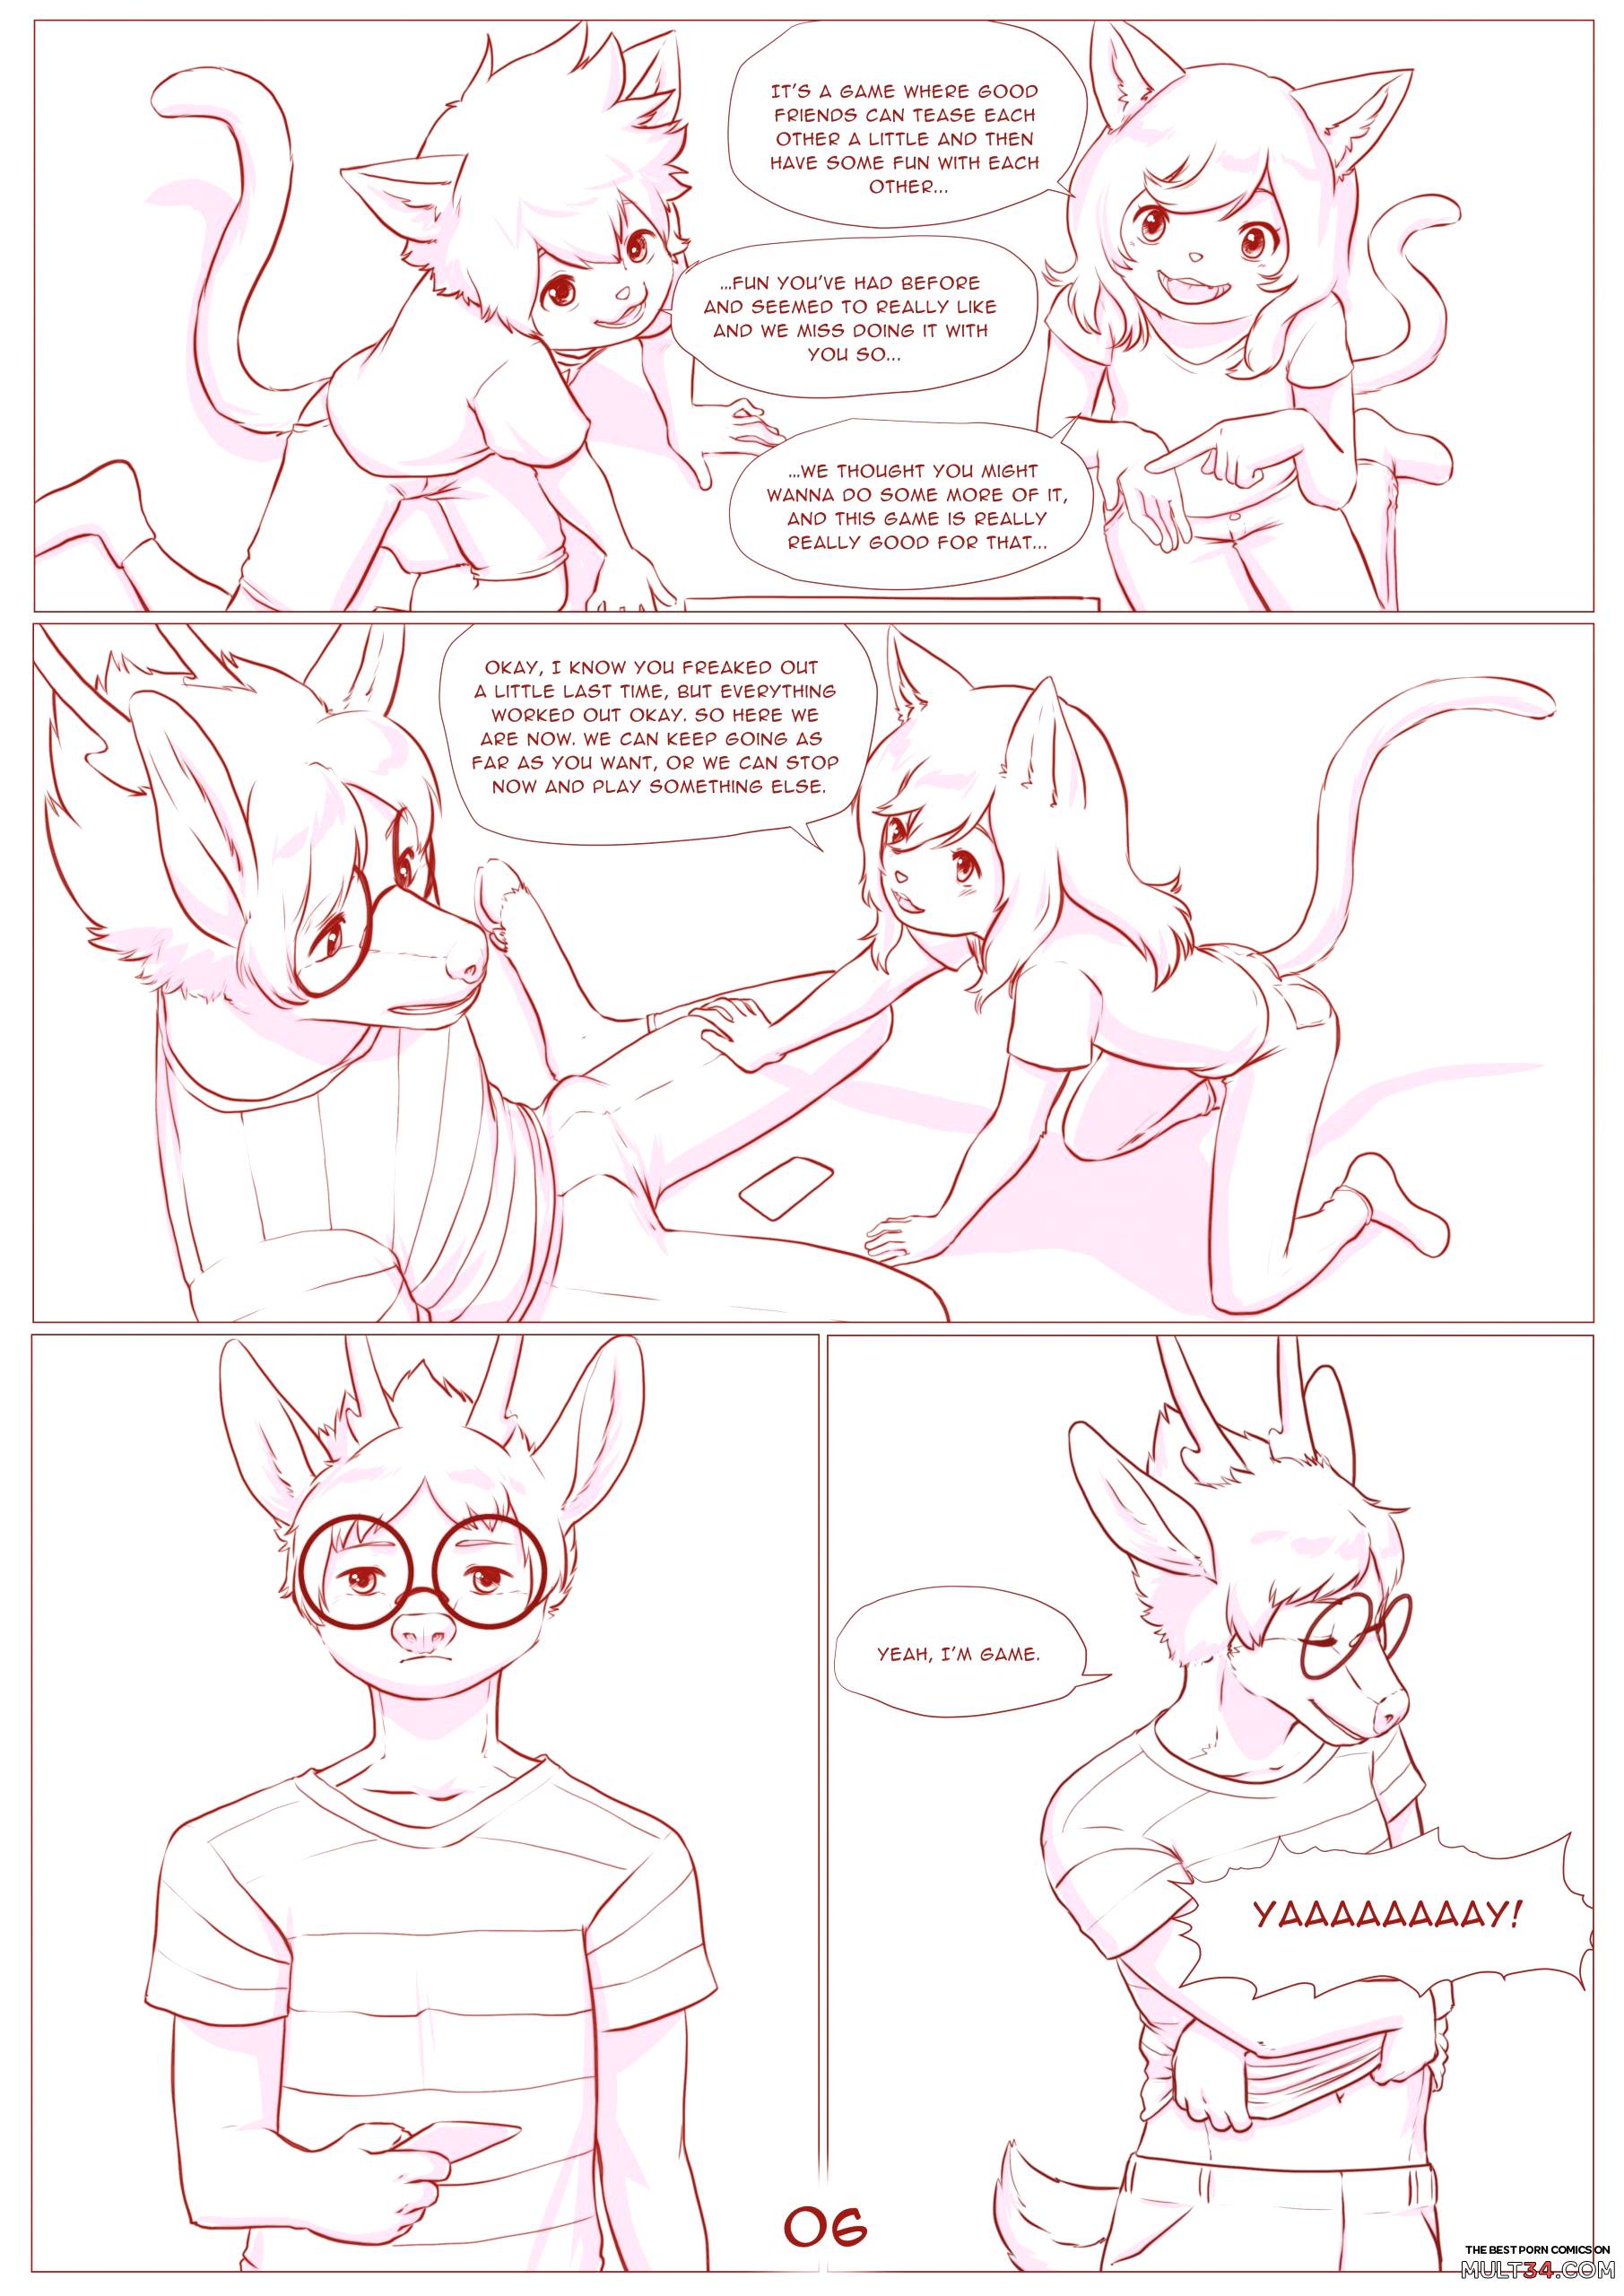 Fun and Games page 6